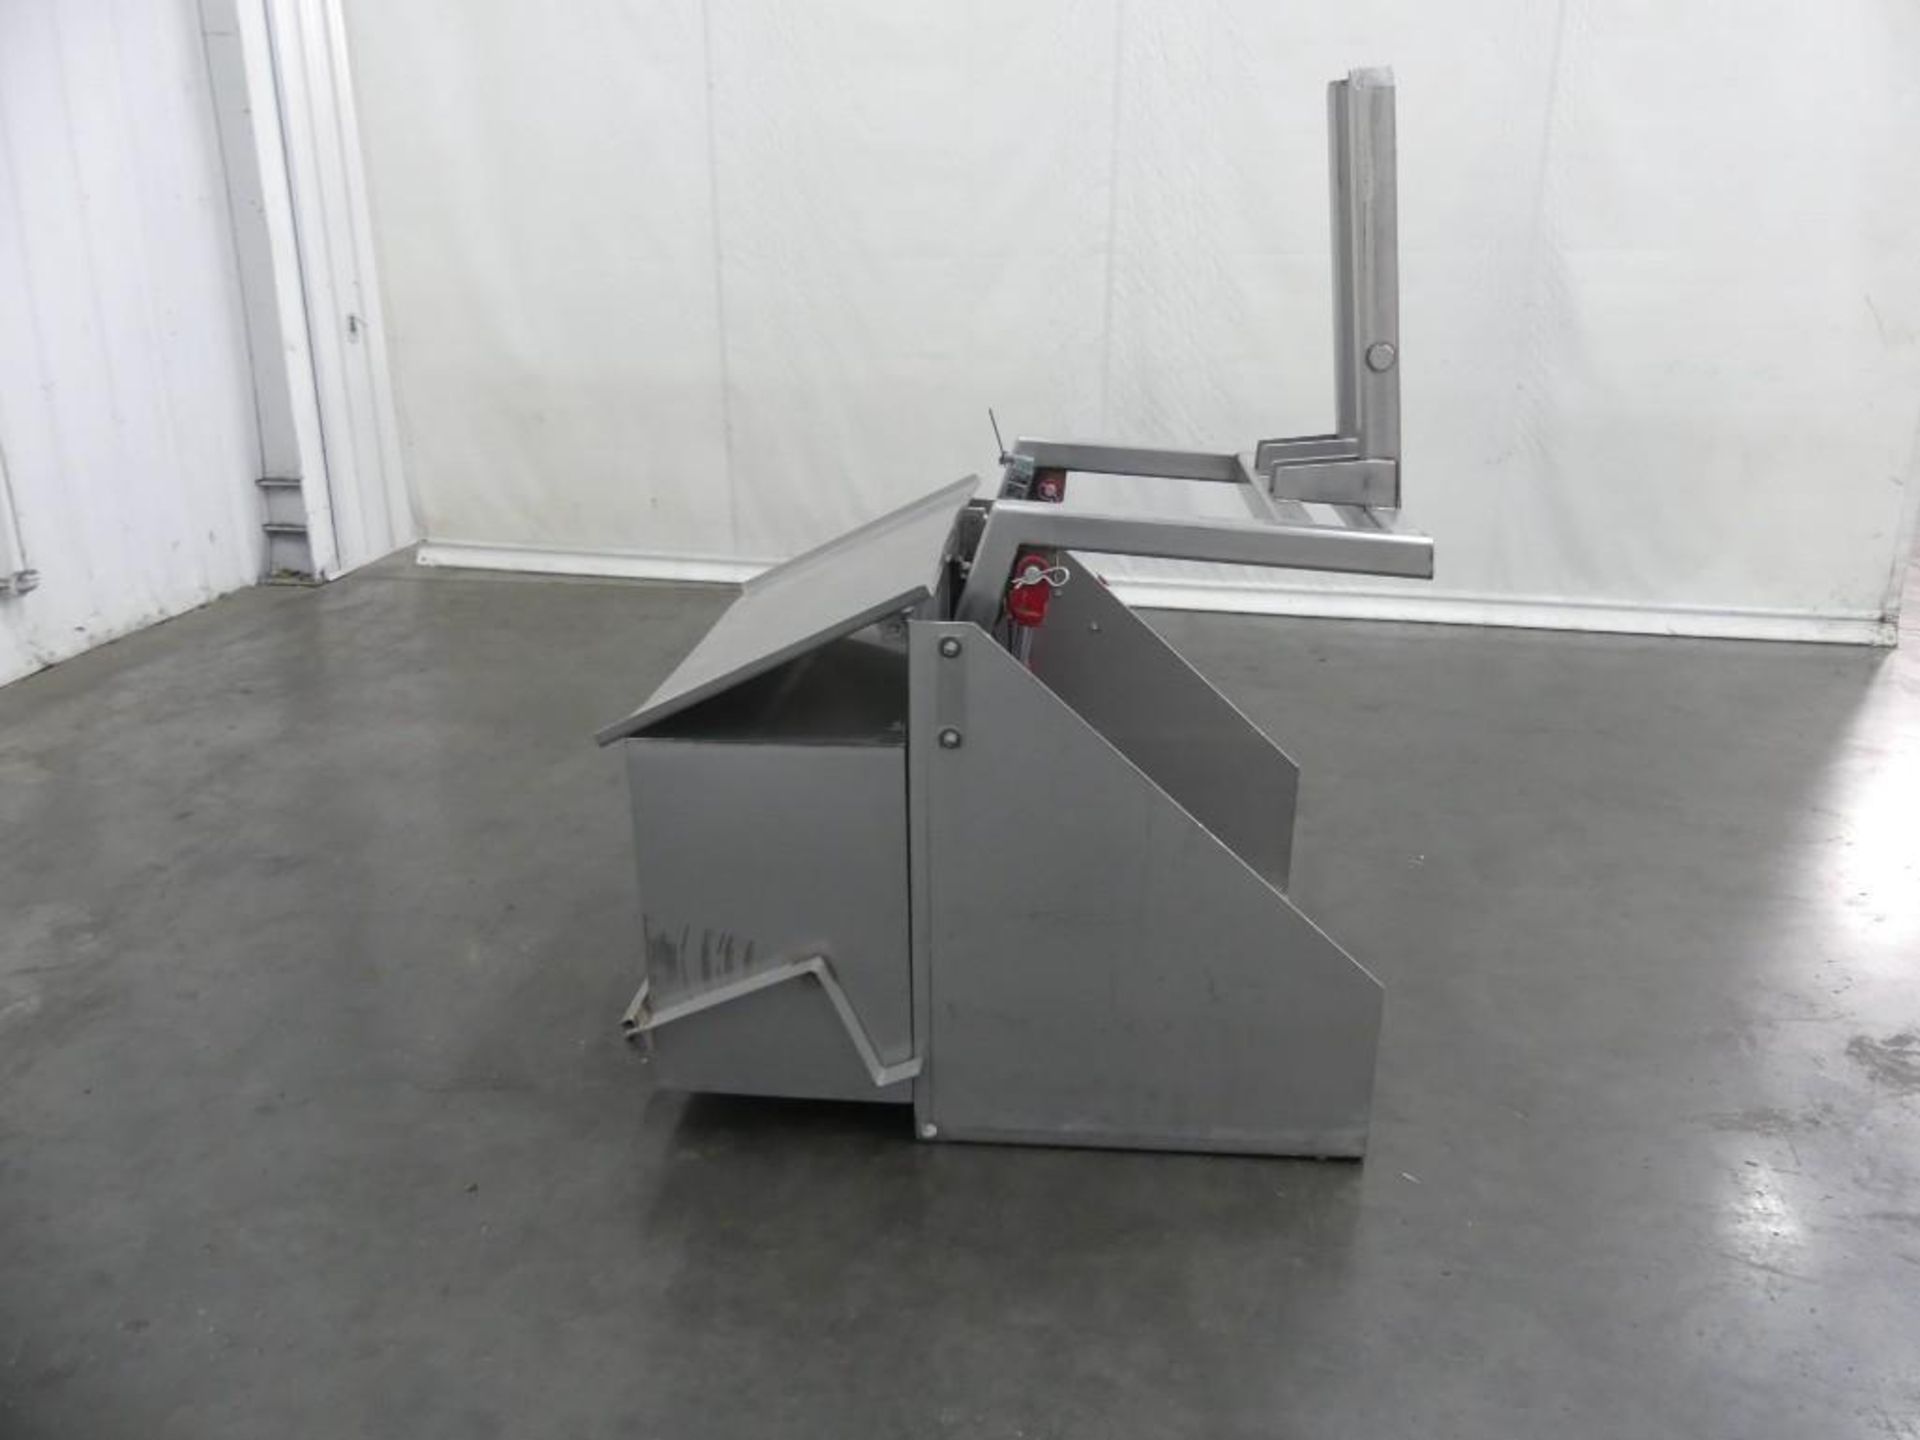 Stainless Steel Hydraulic Mixing Bowl Tipper - Image 2 of 8